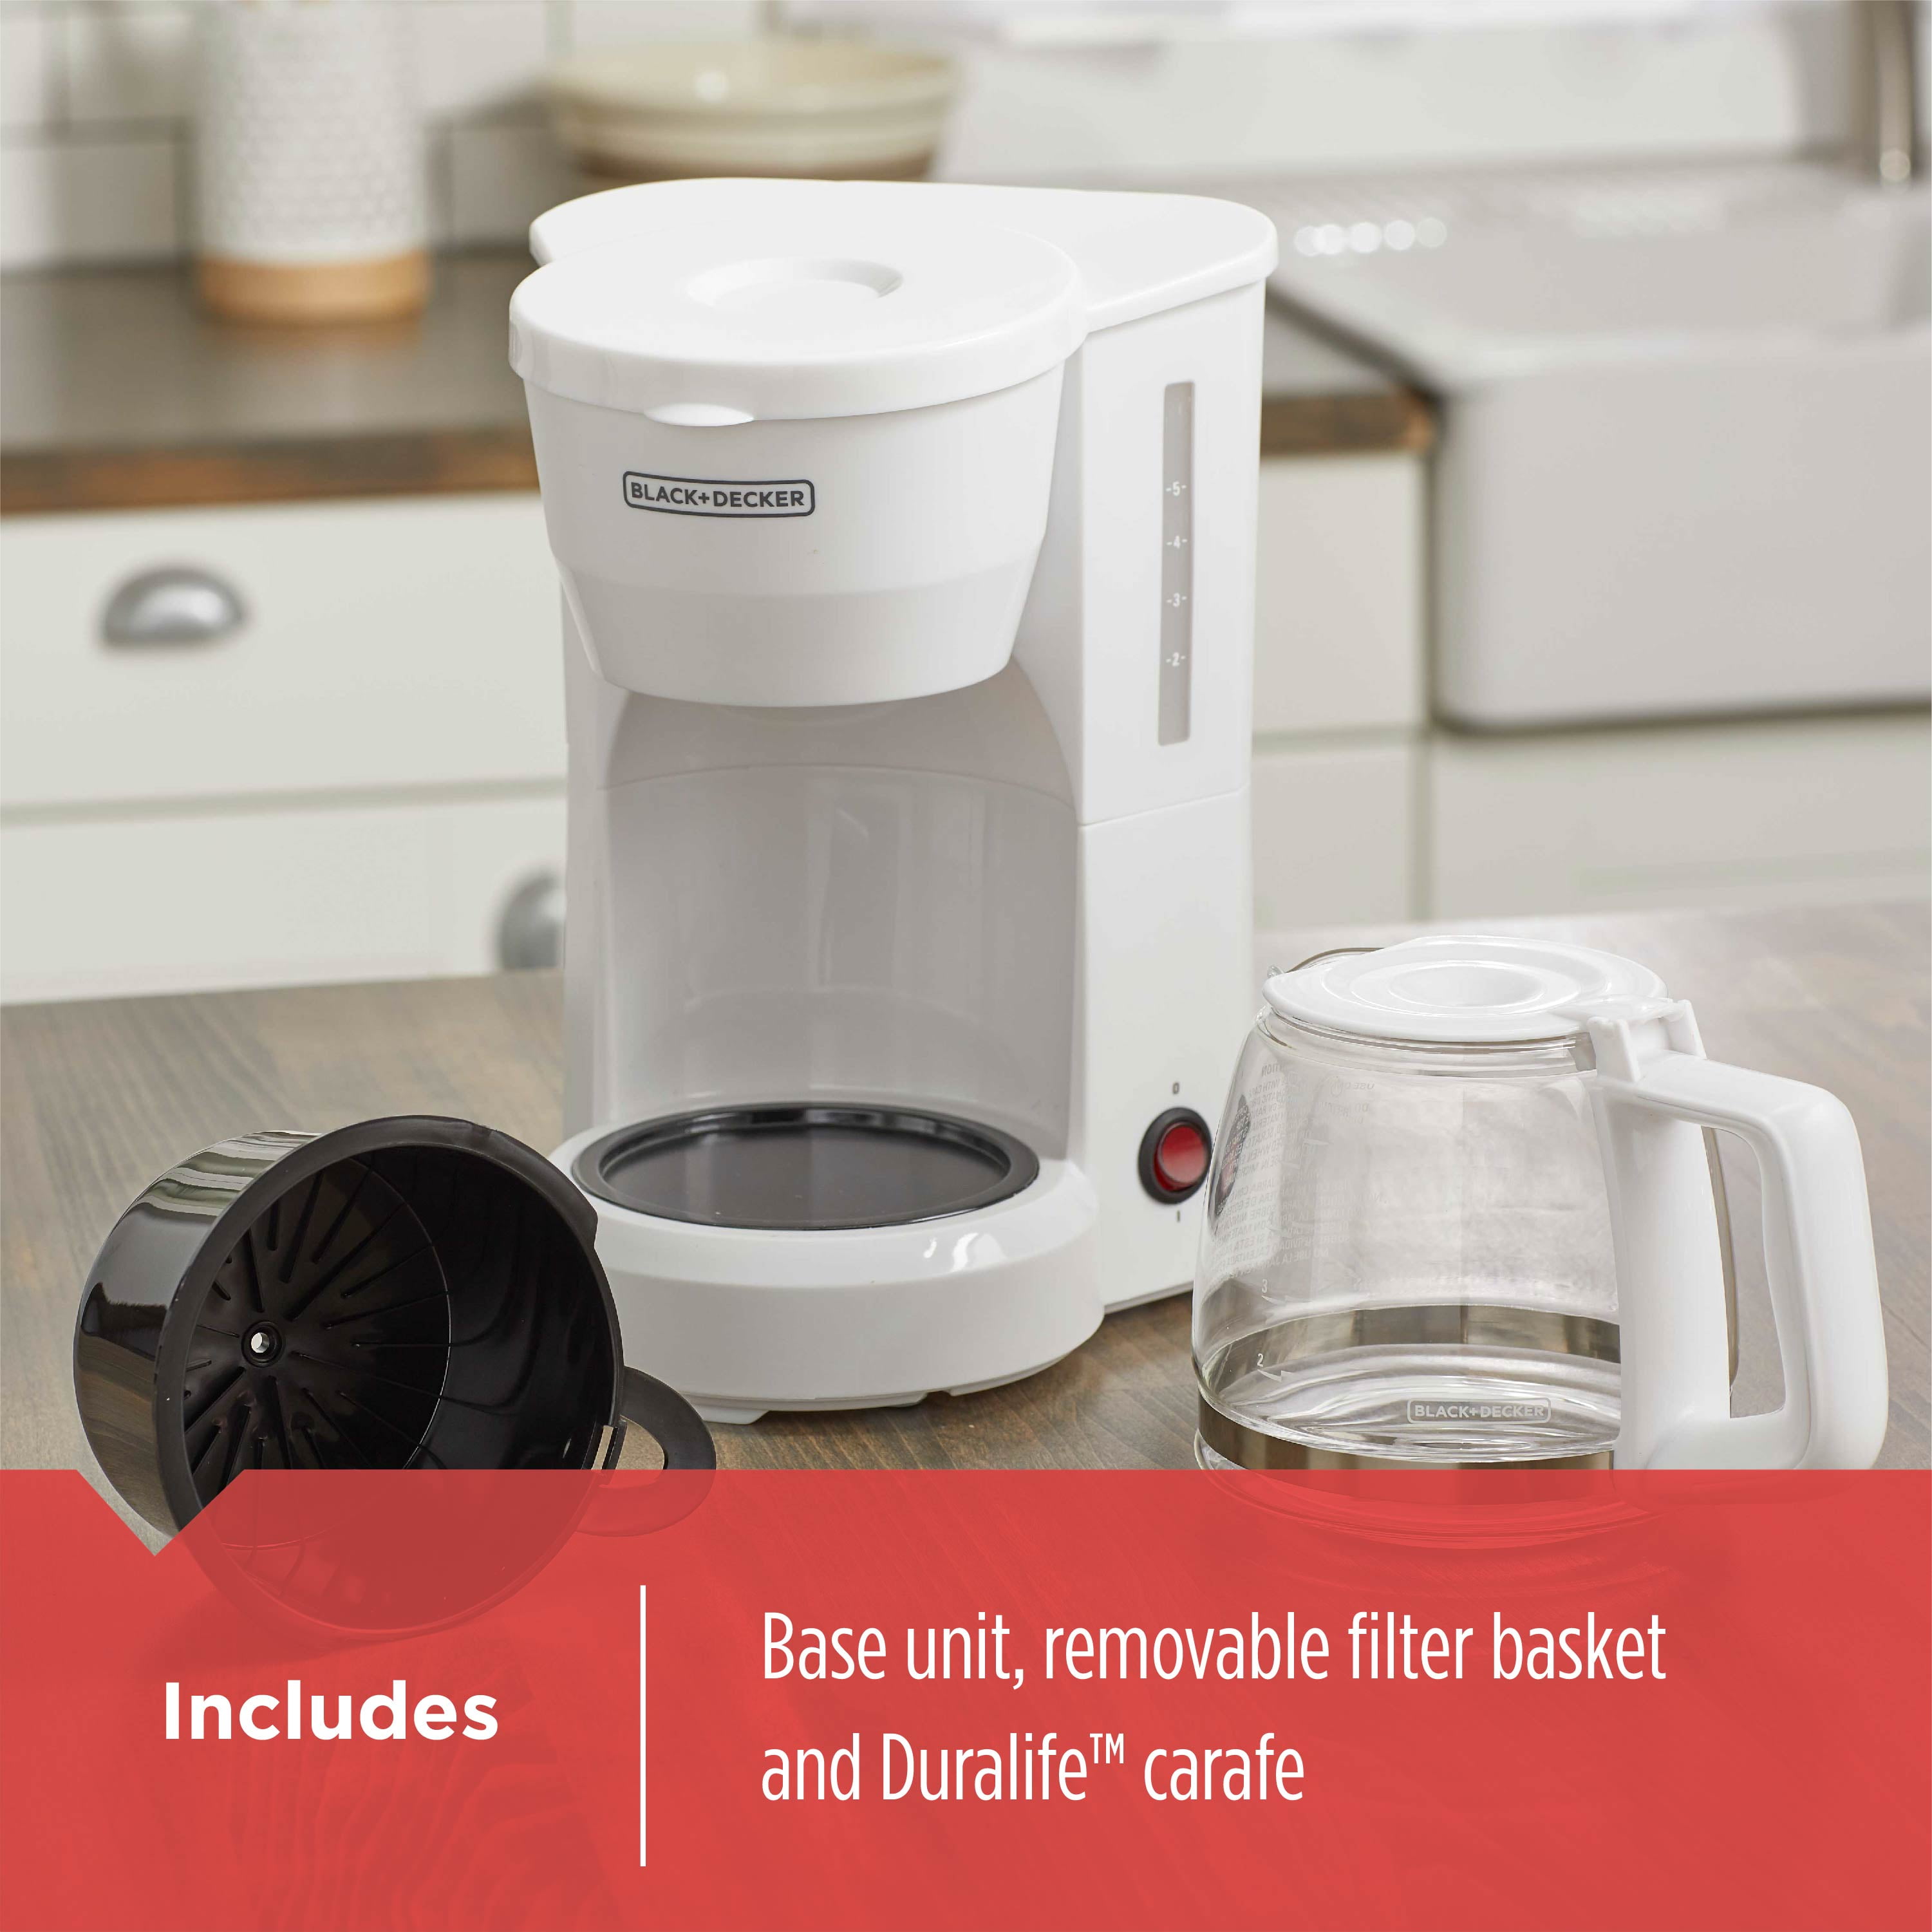 White DCM600W BLACK+DECKER 5-Cup Coffeemaker with Glass Carafe